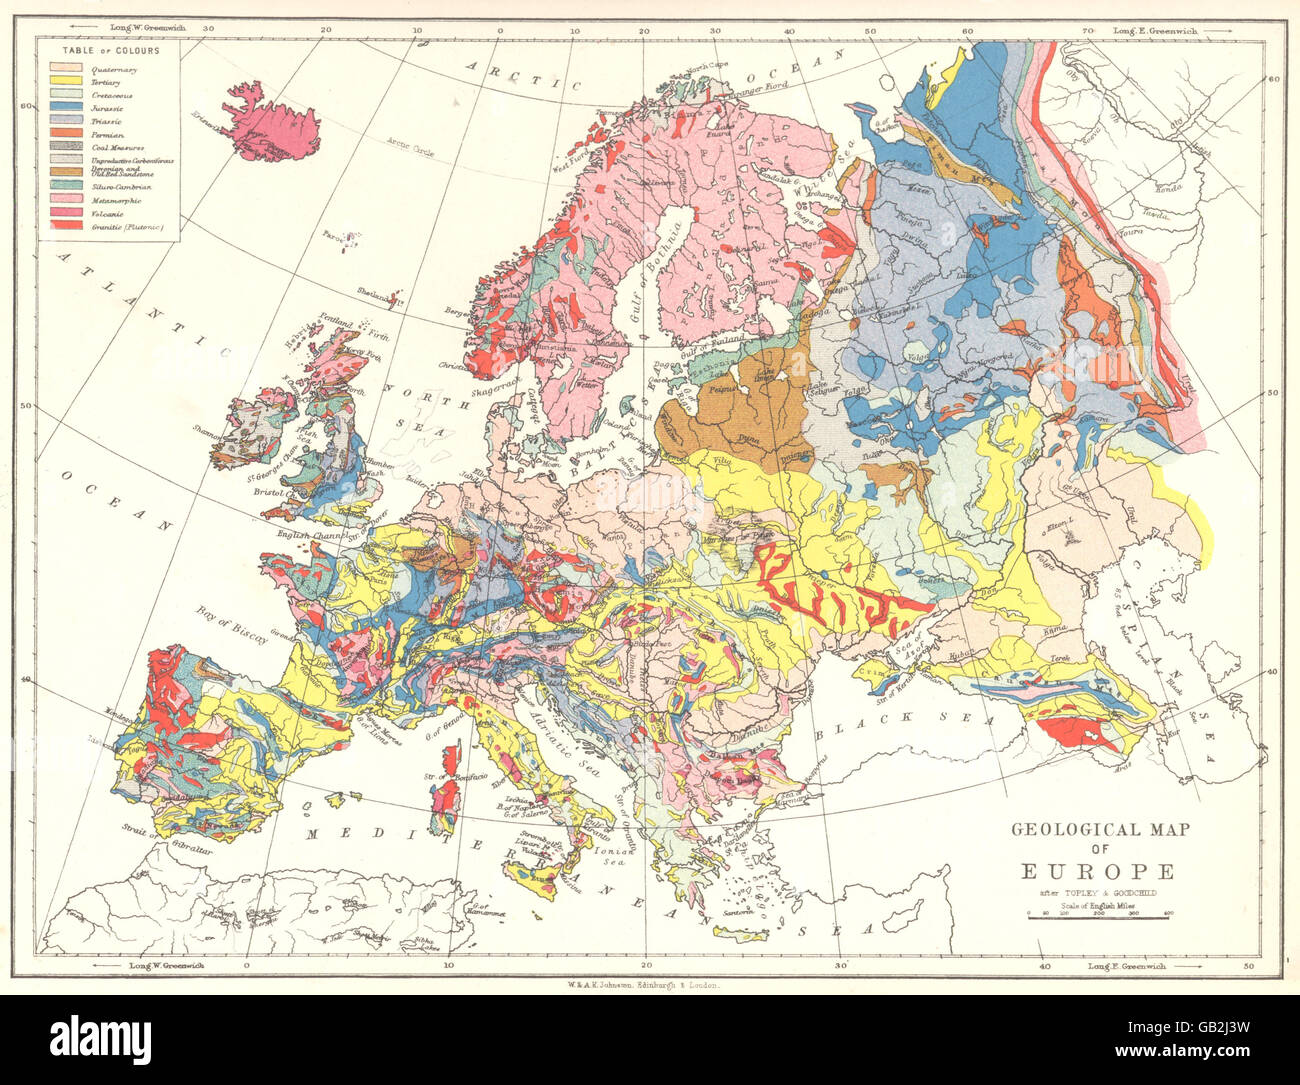 EUROPE: Geographical map of Europe, 1897 Stock Photo